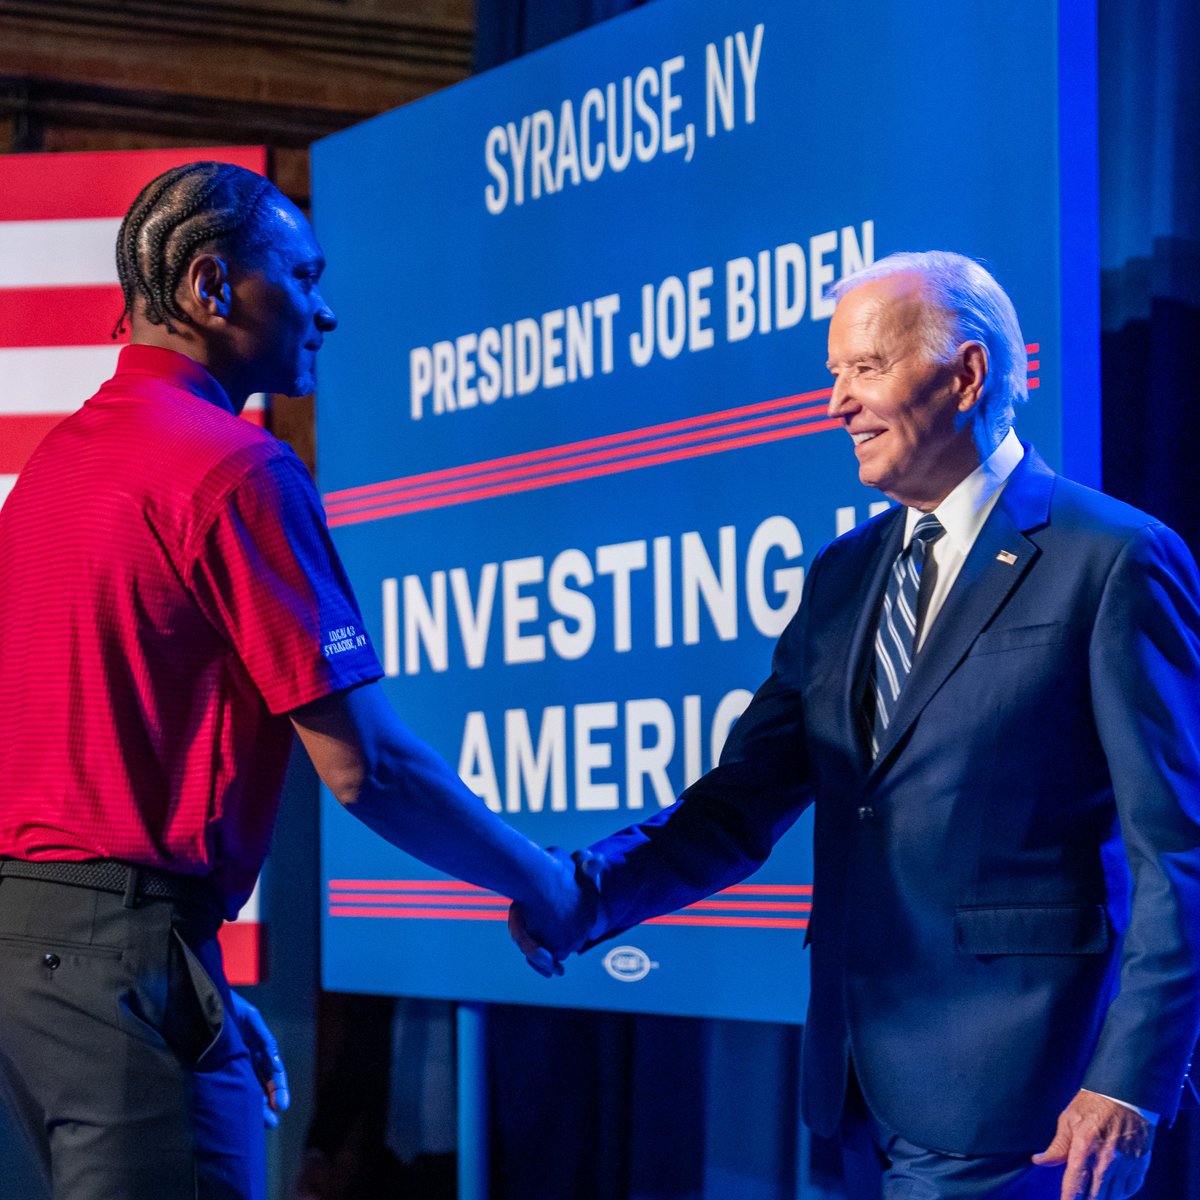 With today’s report of 175,000 new jobs, the great American comeback continues.

I had a plan to turn our country around and build our economy from the middle out and the bottom up. 

With well over 15 million jobs created since I took office, we are seeing that plan in action.